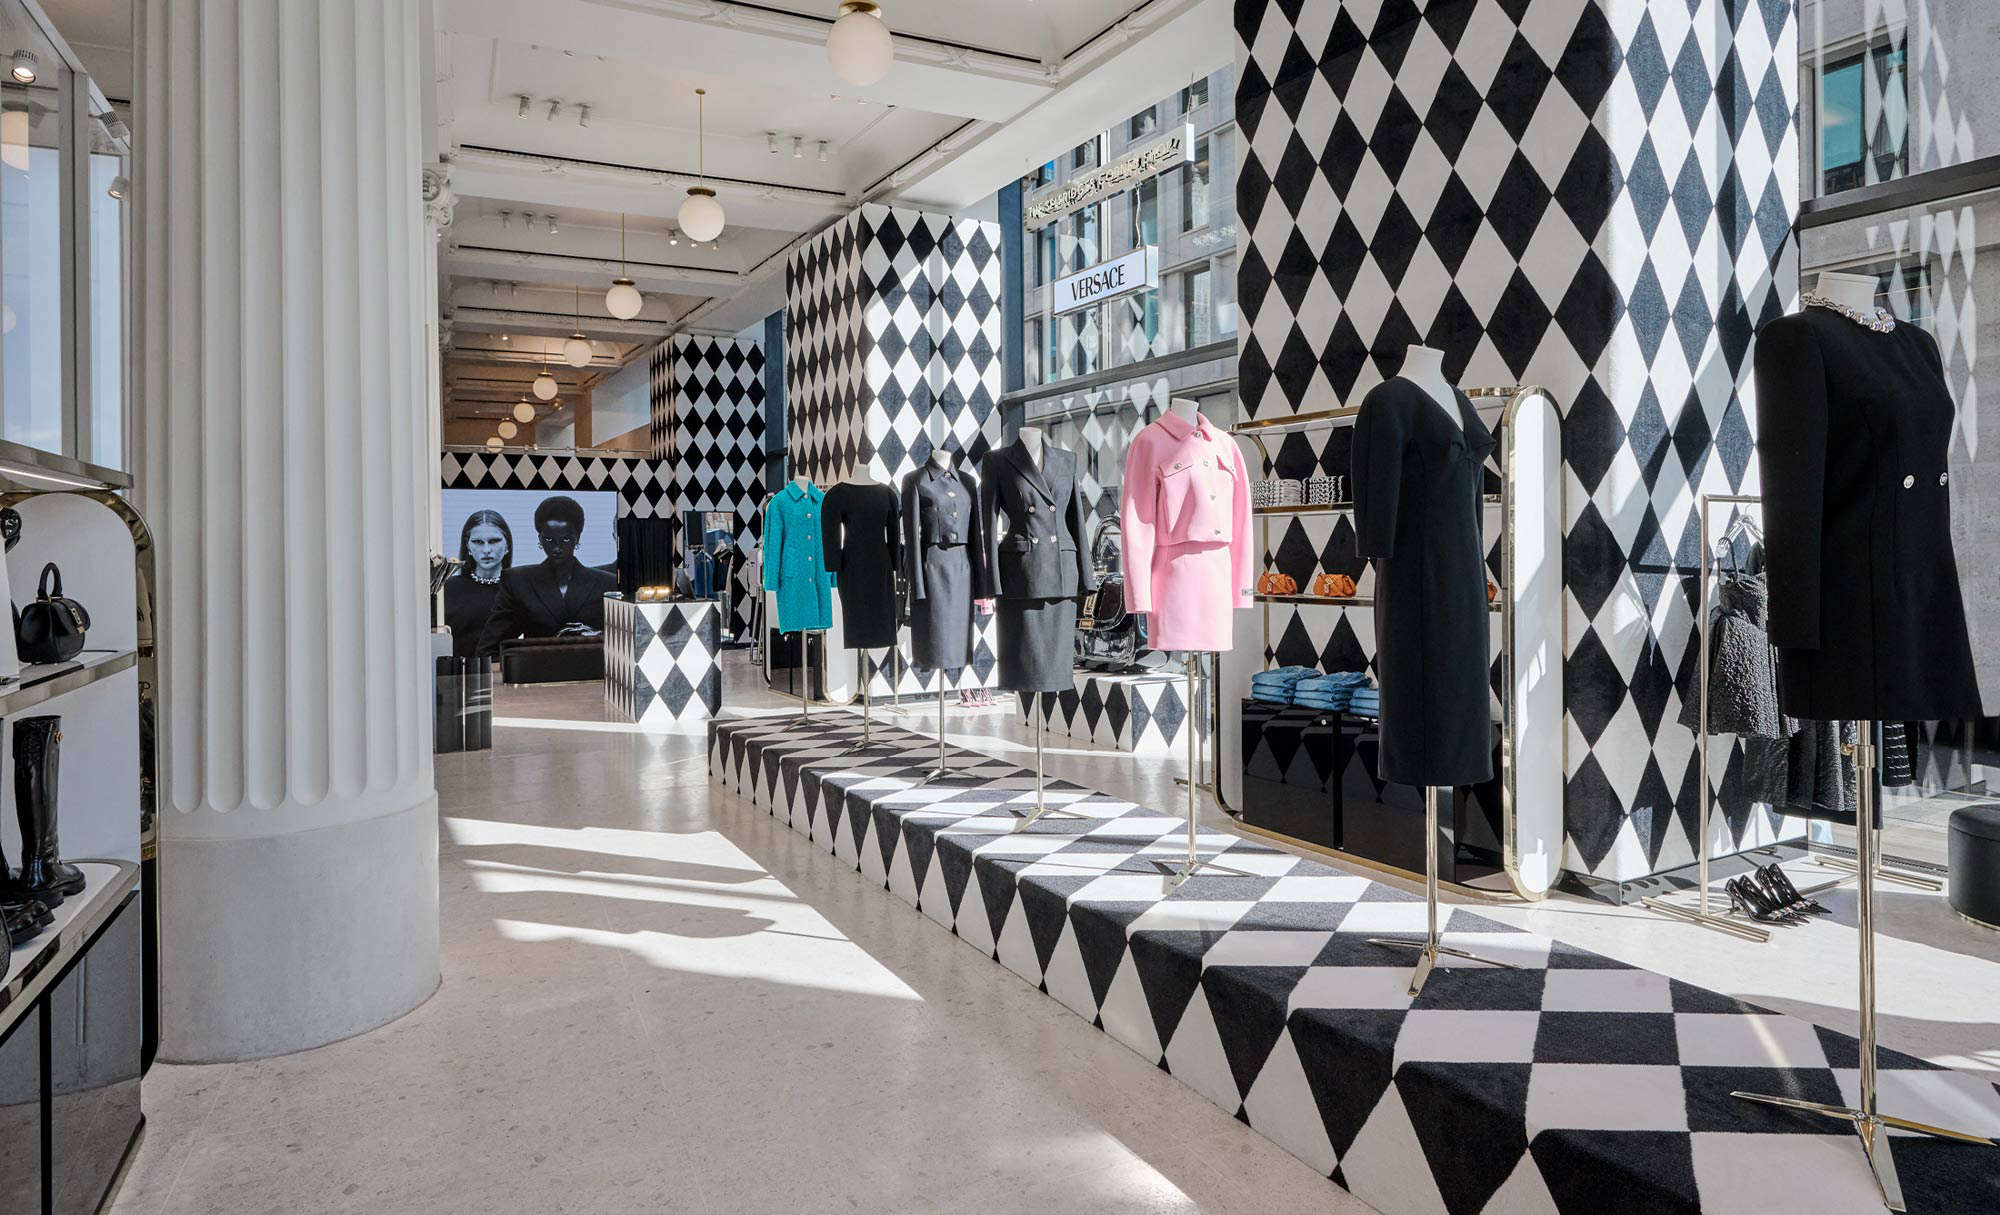 SPANX Launches First UK Apparel Pop-Up in Selfridges, London